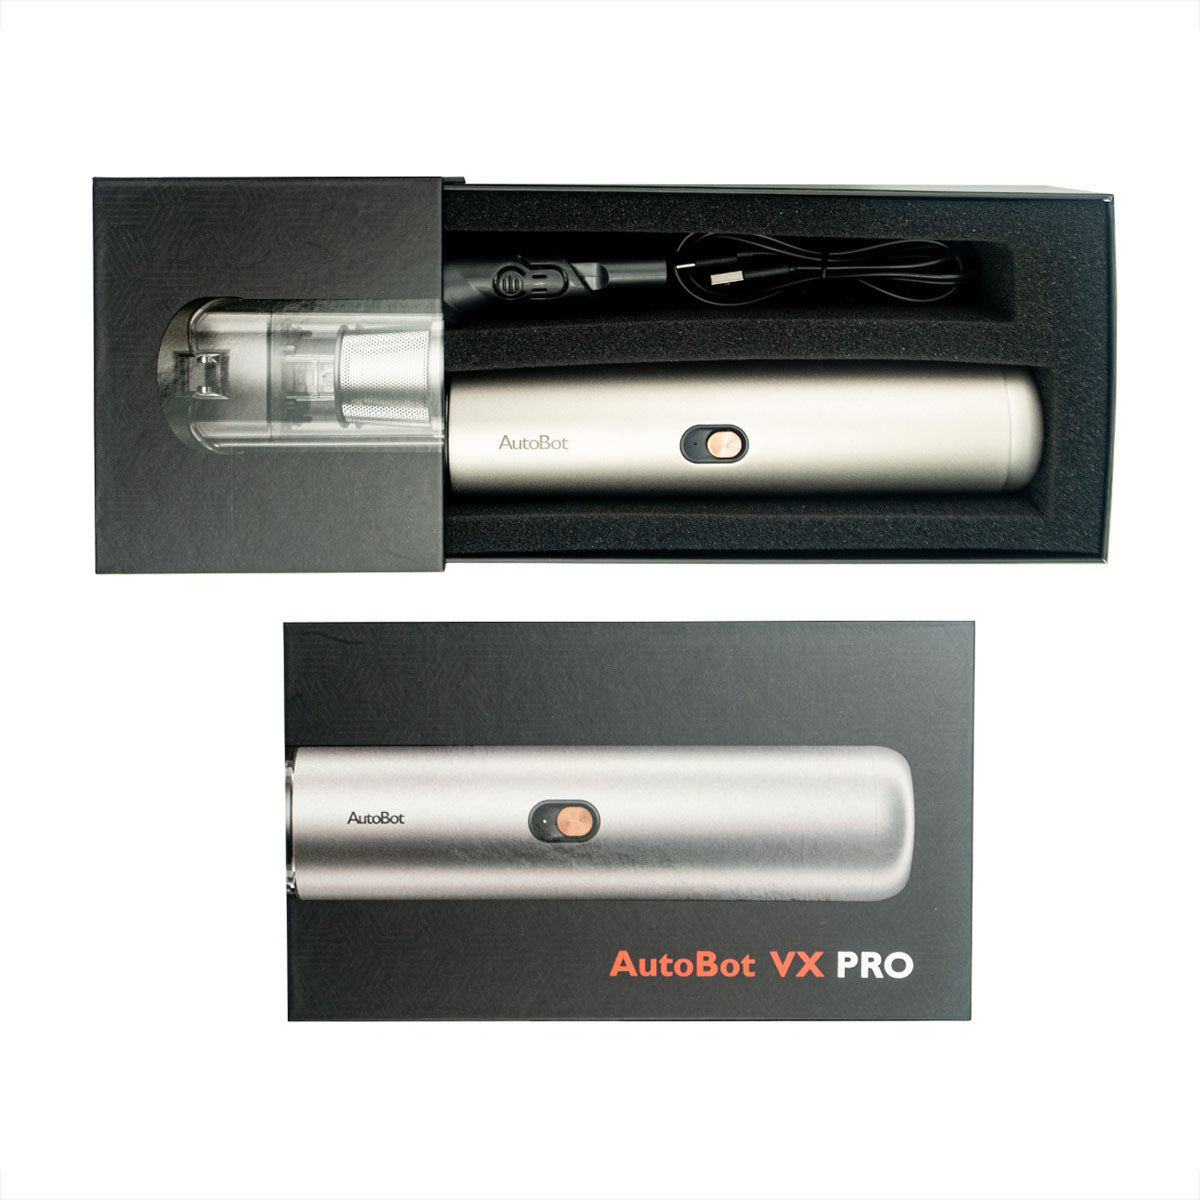 AutoBot VX PRO Handheld Home and Car Vacuum Cleaner